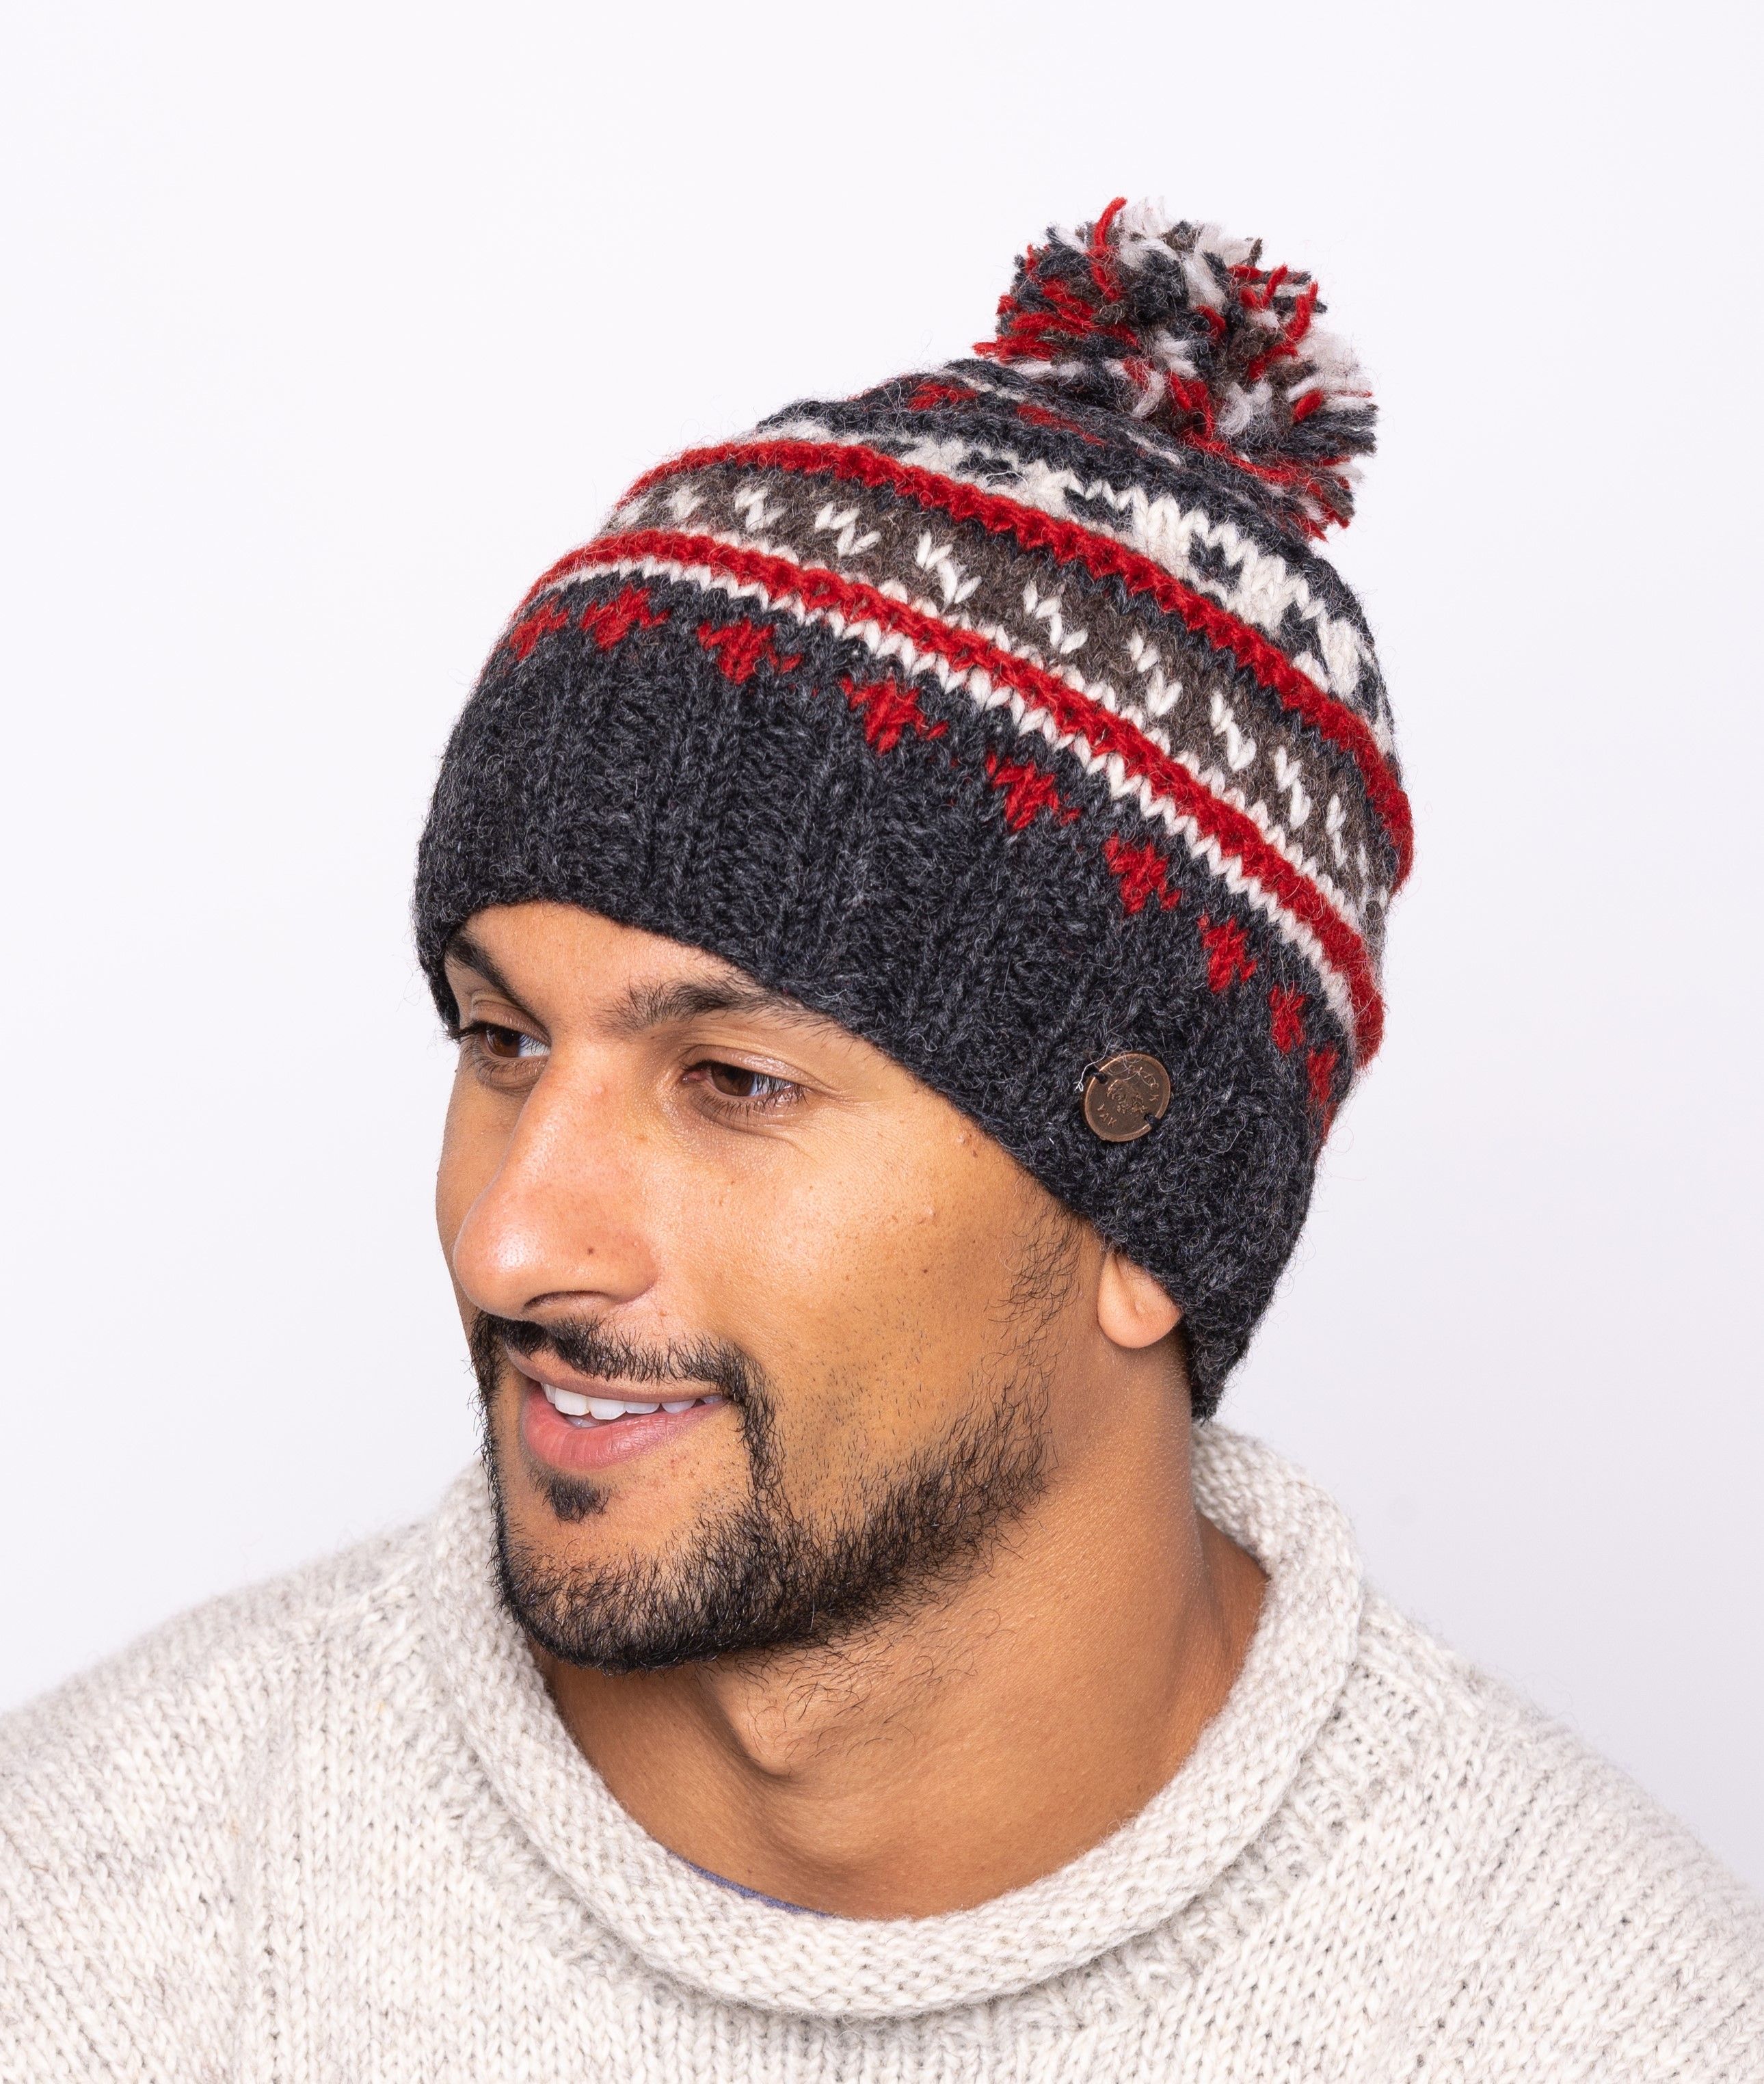 Reverse ridge bobble hat in red and charcoal